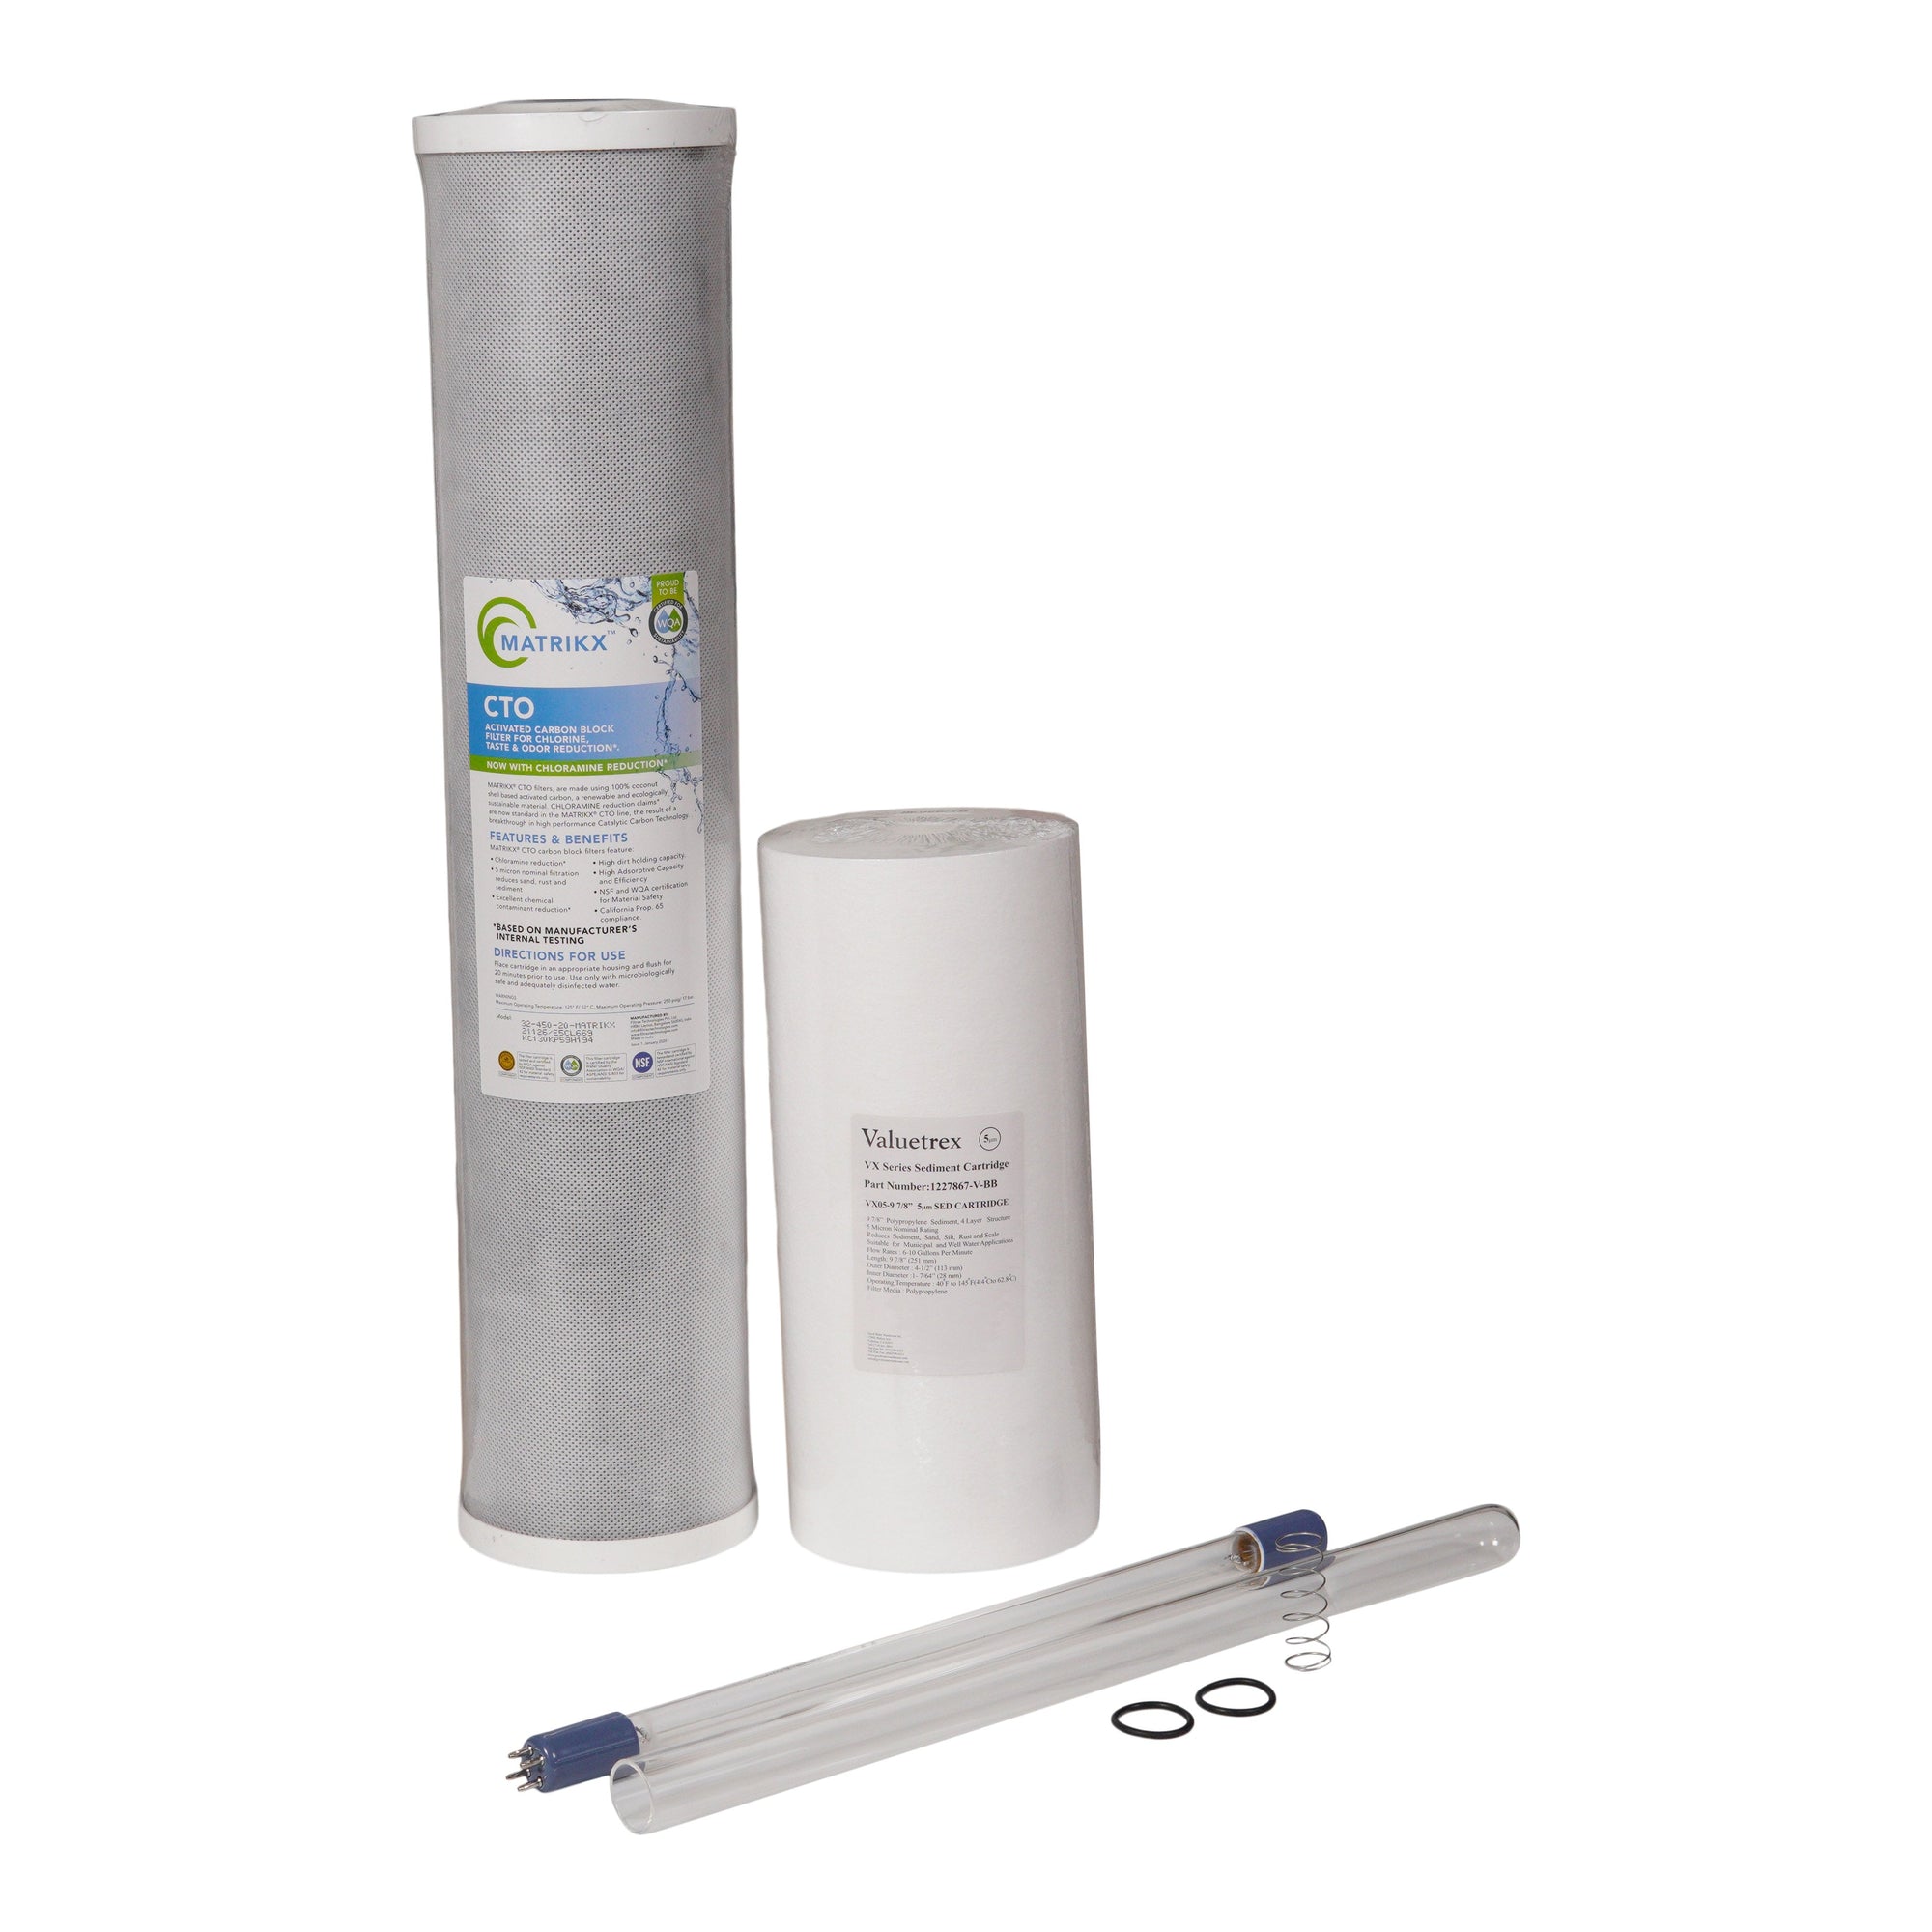 Greenway GUVR10-20H Replacement UV Lamp, Sleeve and Filters